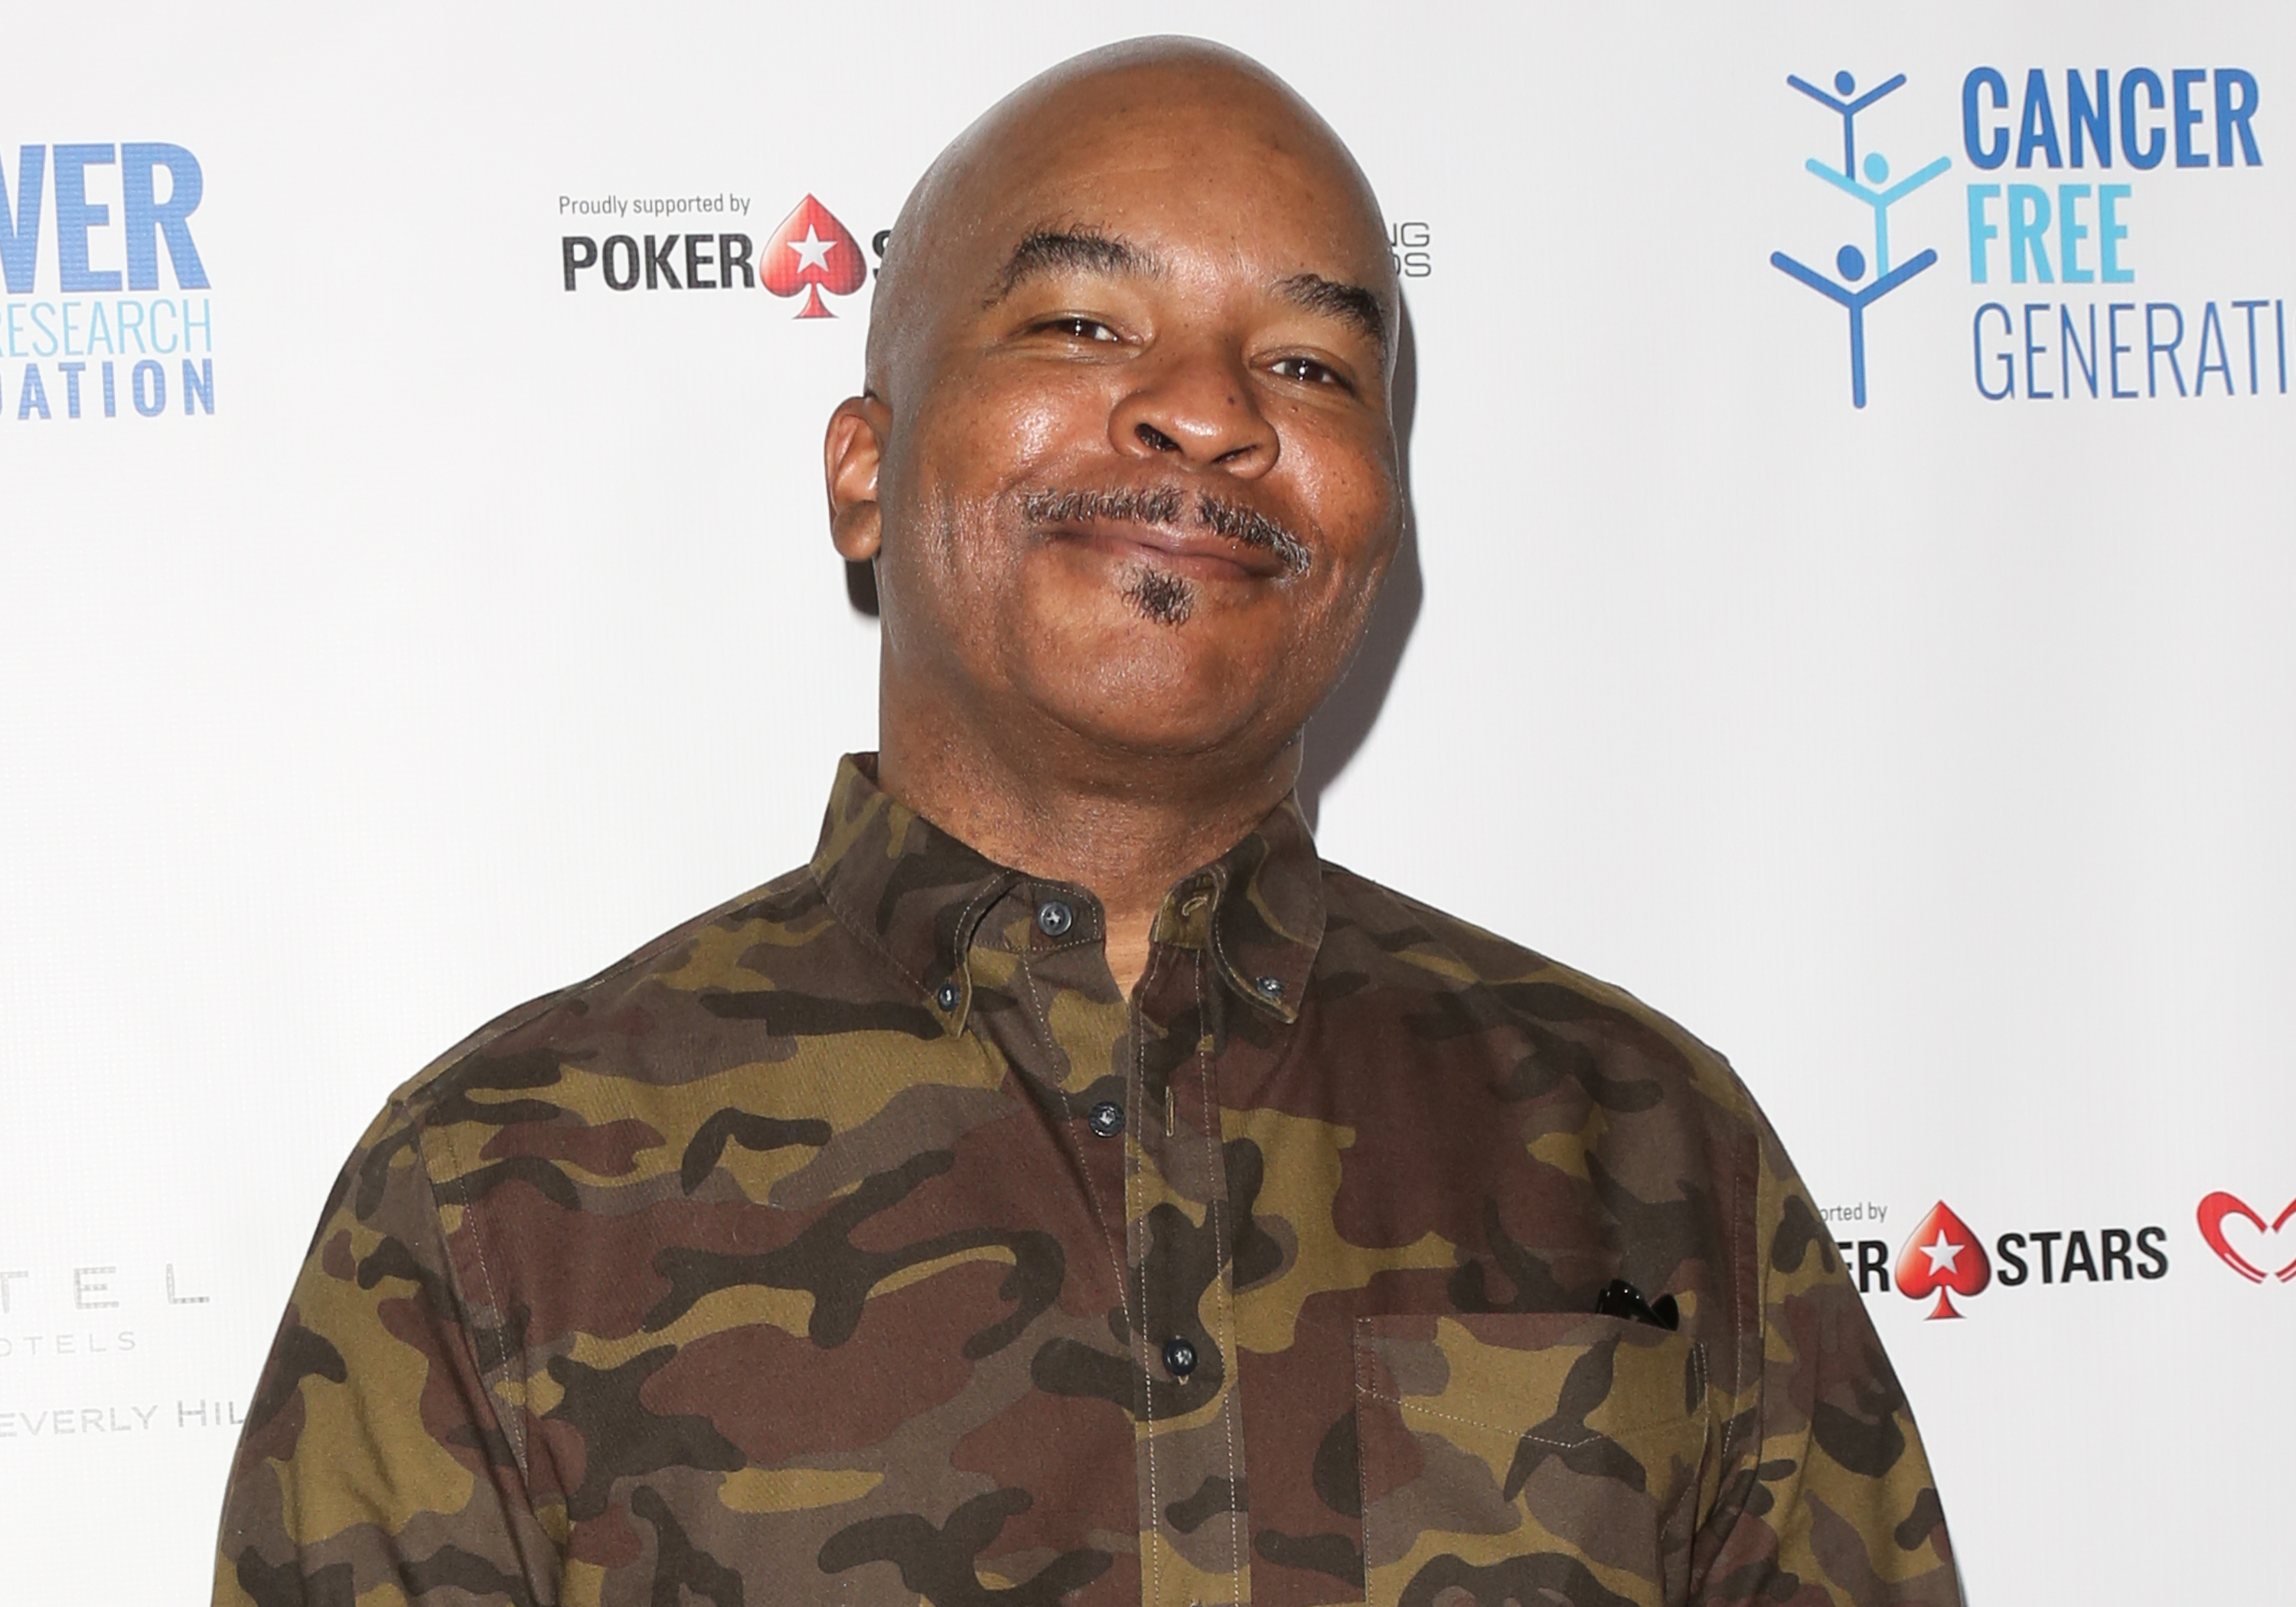 LOS ANGELES, CA - JUNE 03: Actor David Alan Grier attends the 4th annual 'Ante Up For A Cancer Free Generation Poker Tournament. (Paul Archuleta - Getty Images)